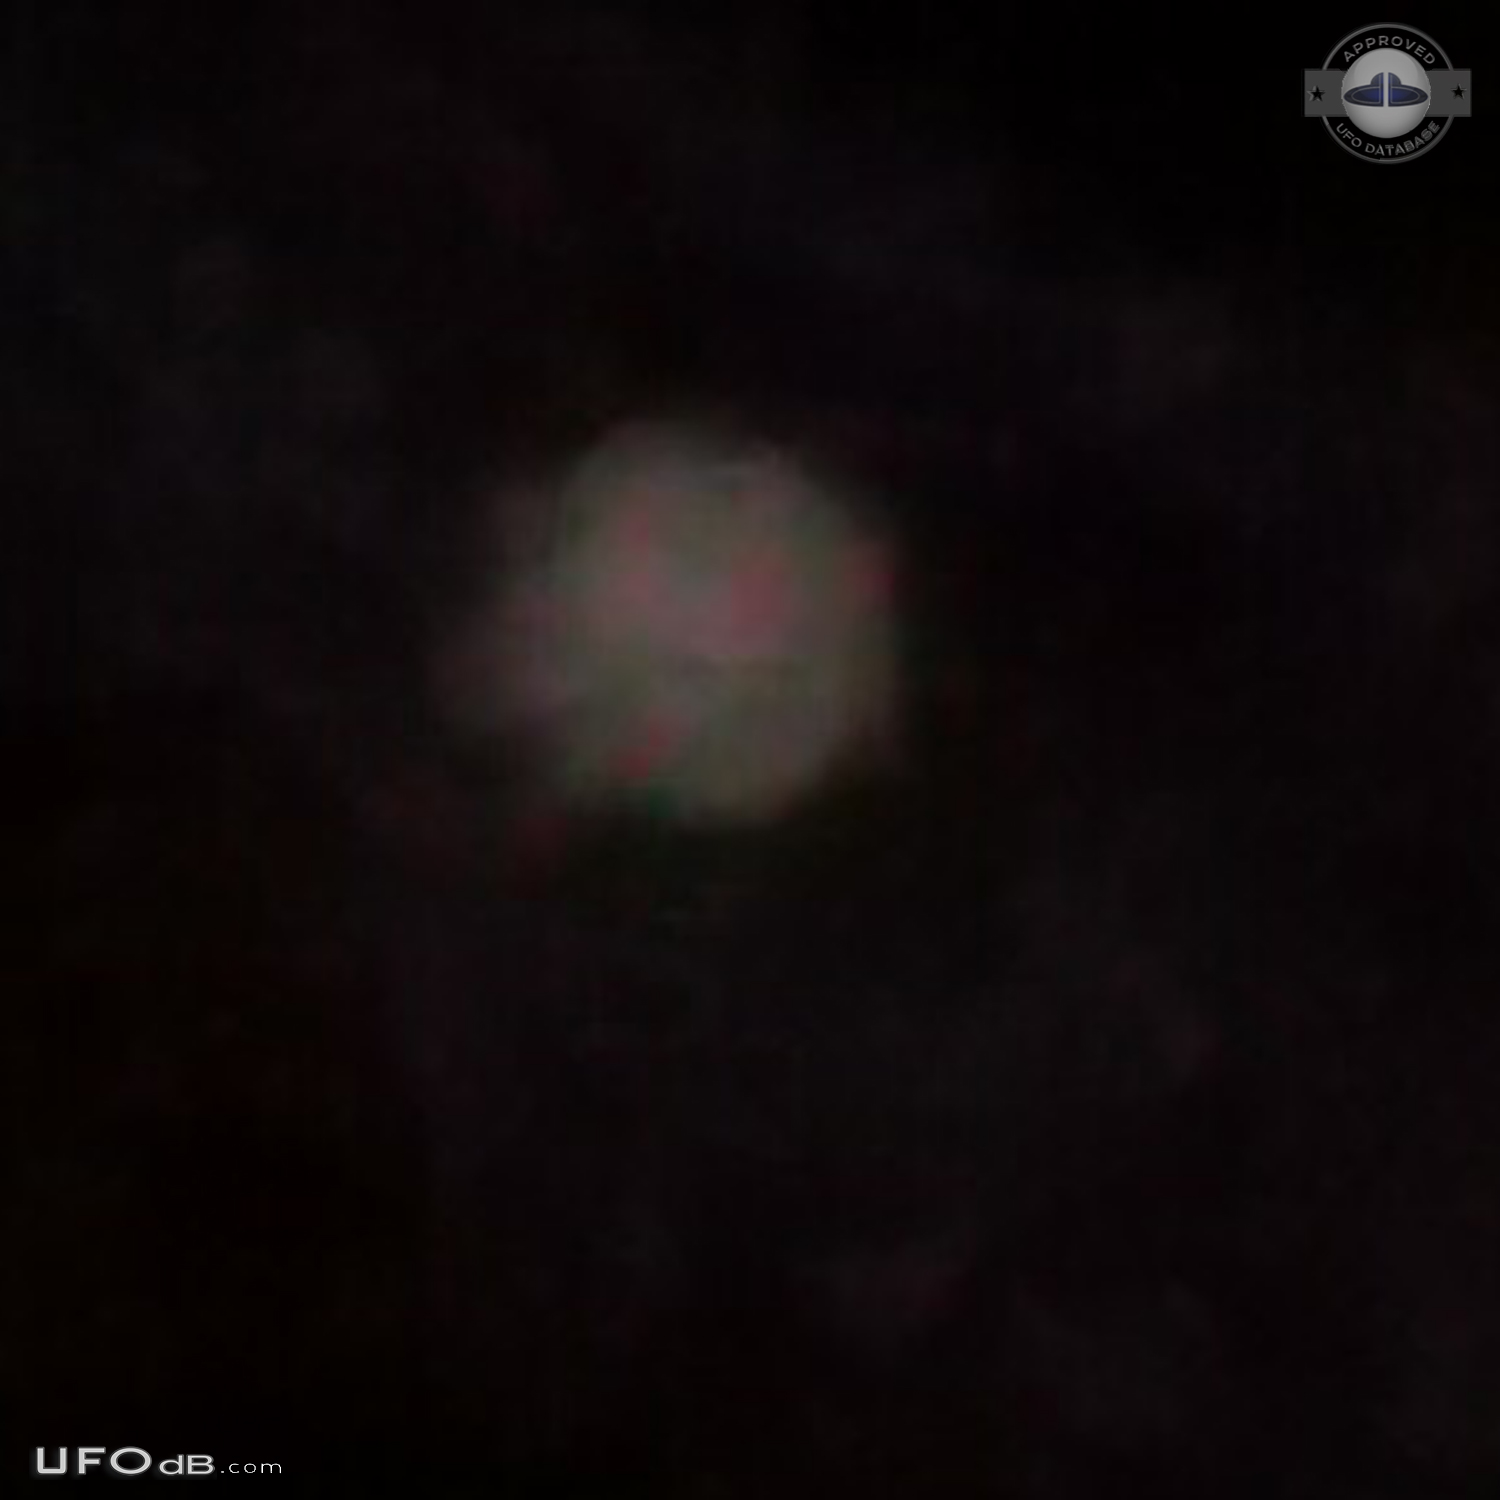 Star like ufo keeps hovering at one spot - Rotterdam Netherlands 2015 UFO Picture #726-4